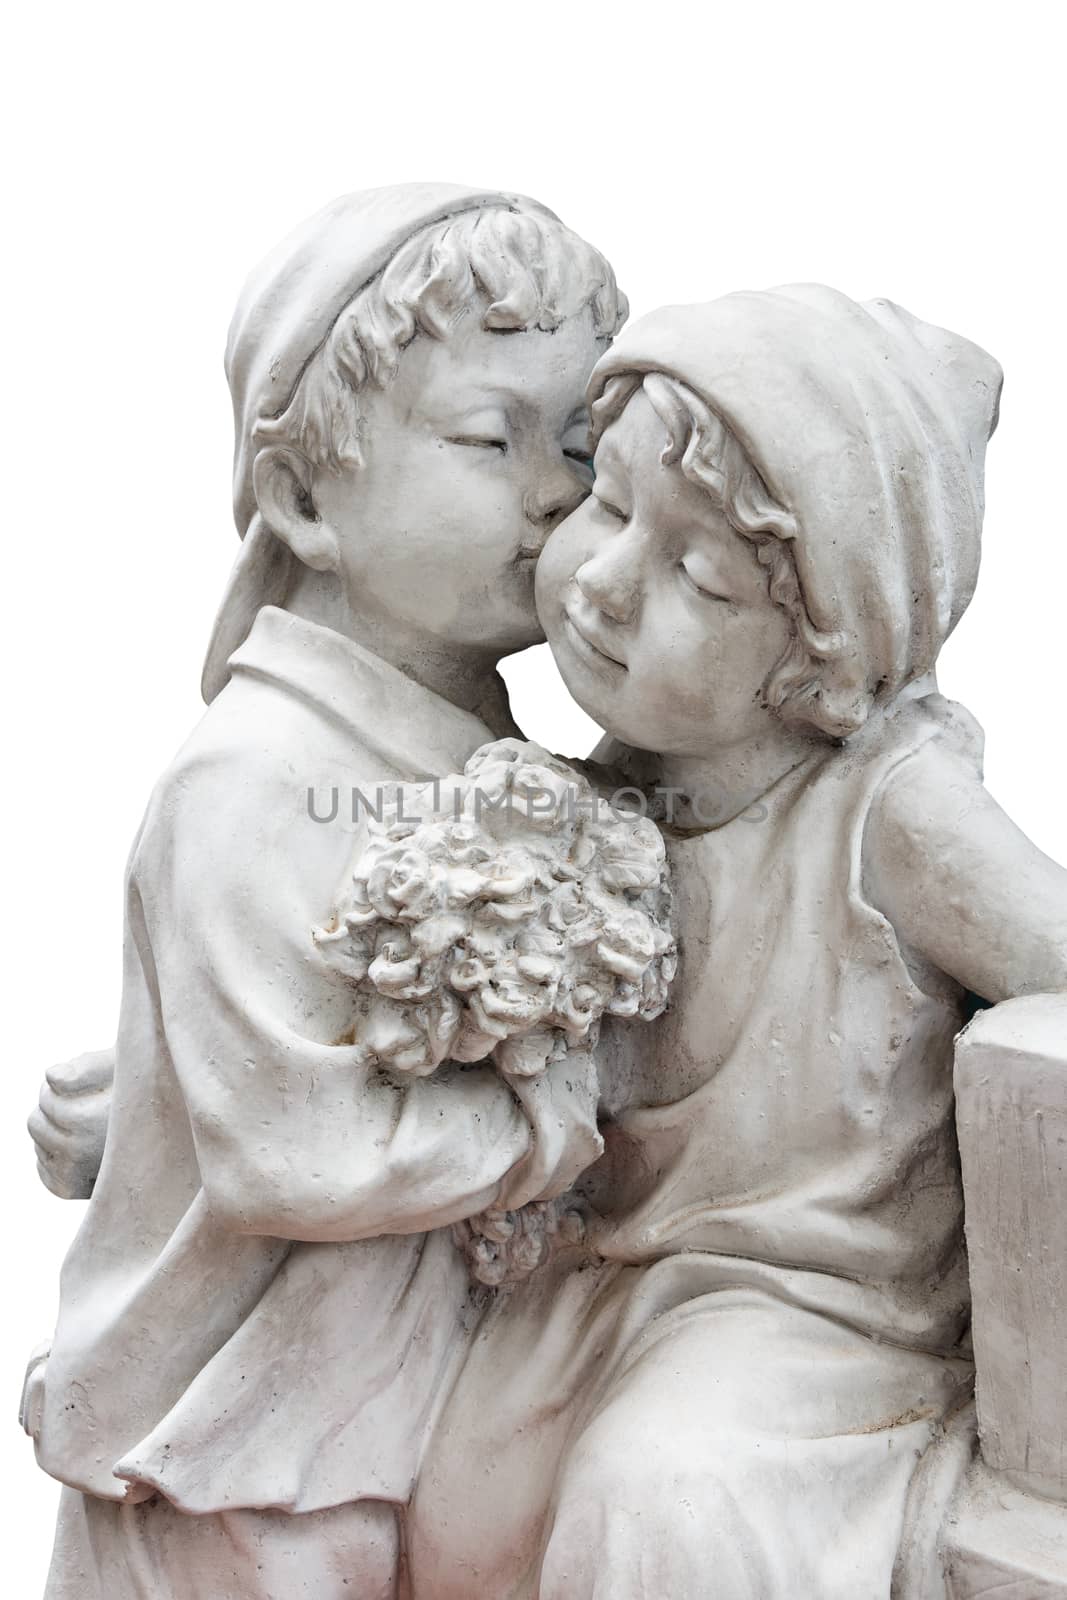 statue of boy hold flower and kiss the girl ( puppy love ) by stockdevil